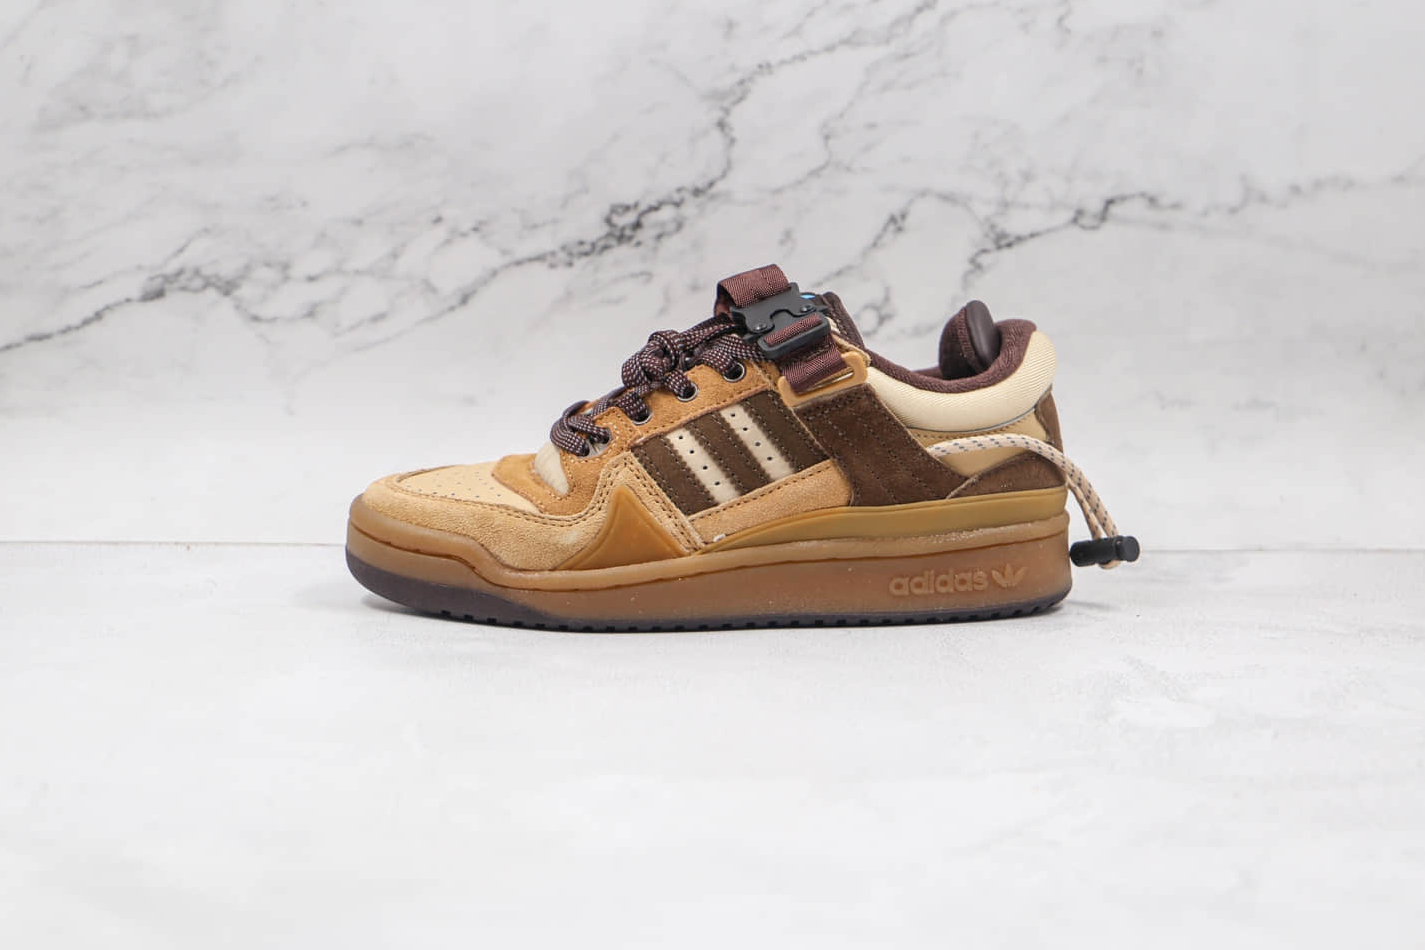 Adidas Bad Bunny x Forum Buckle Low 'The First Cafe' GW0264 - Shop Now for Exclusive Collaboration!